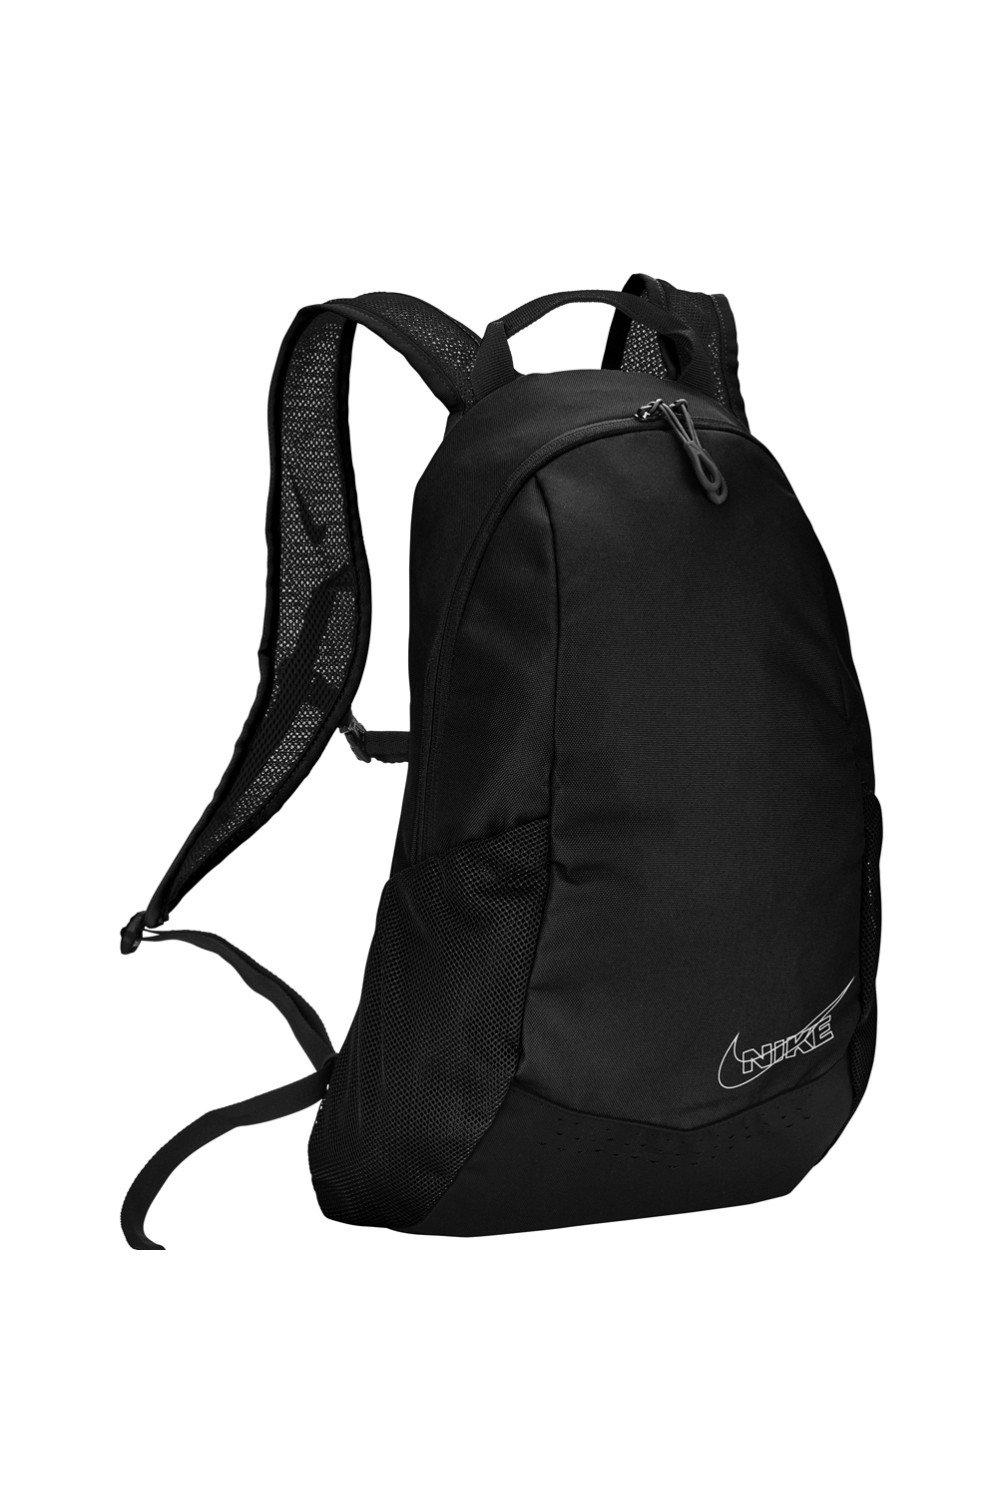 Race Day Backpack